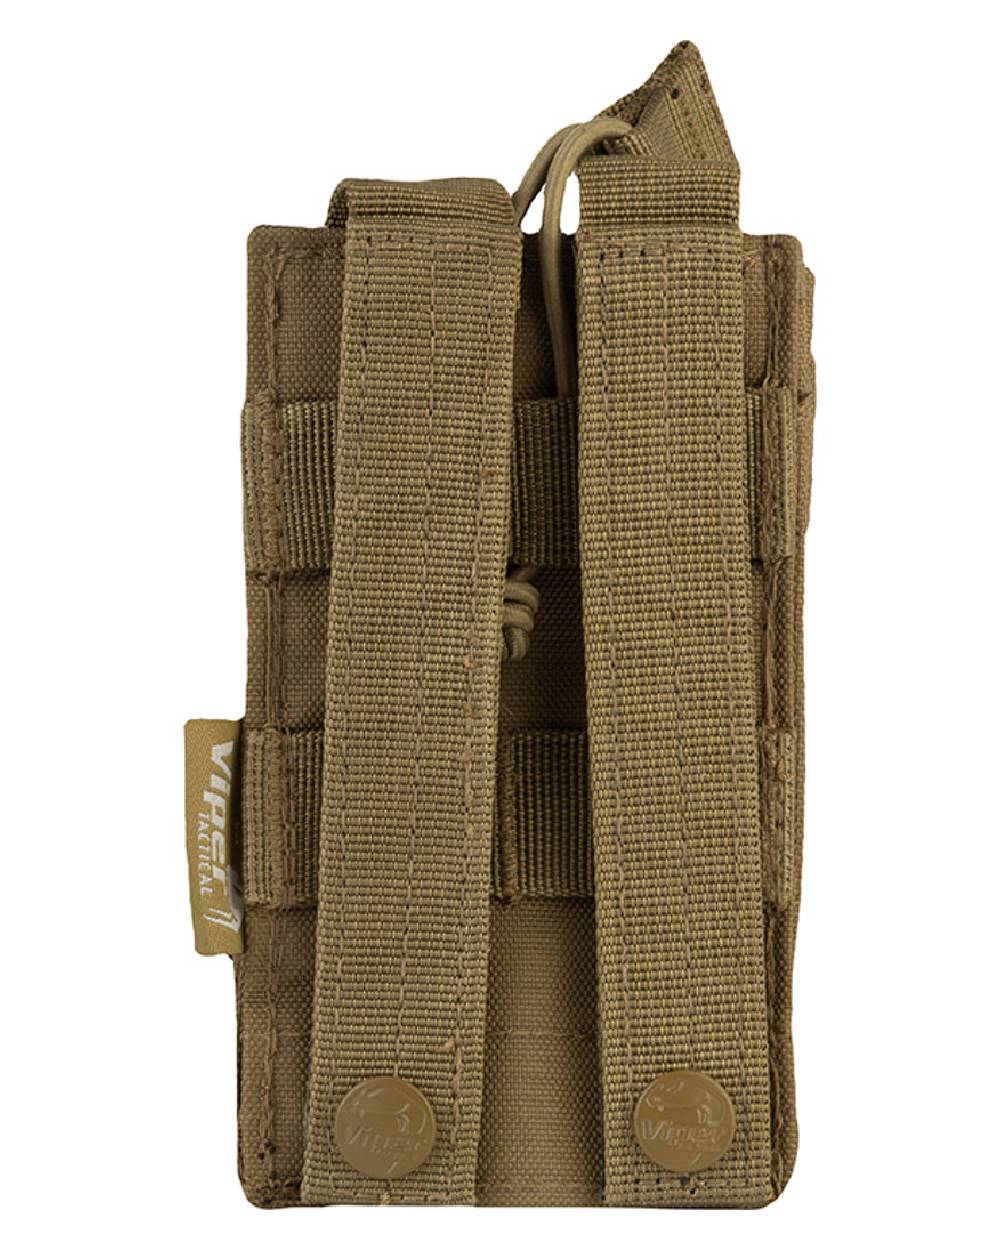 Viper Quick Release Mag Pouch in Coyote 